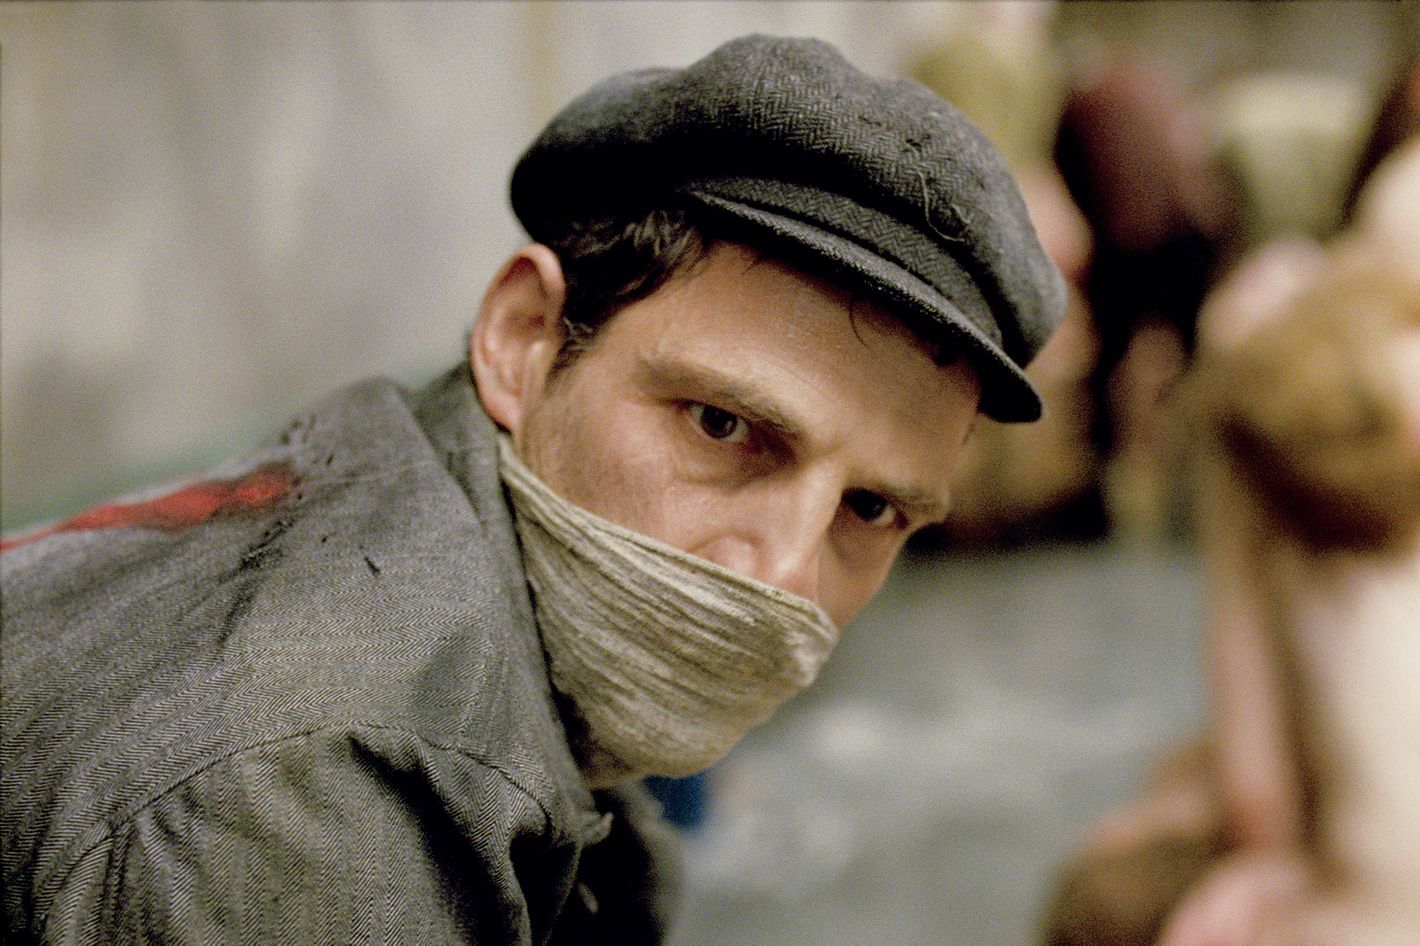 son of saul interview